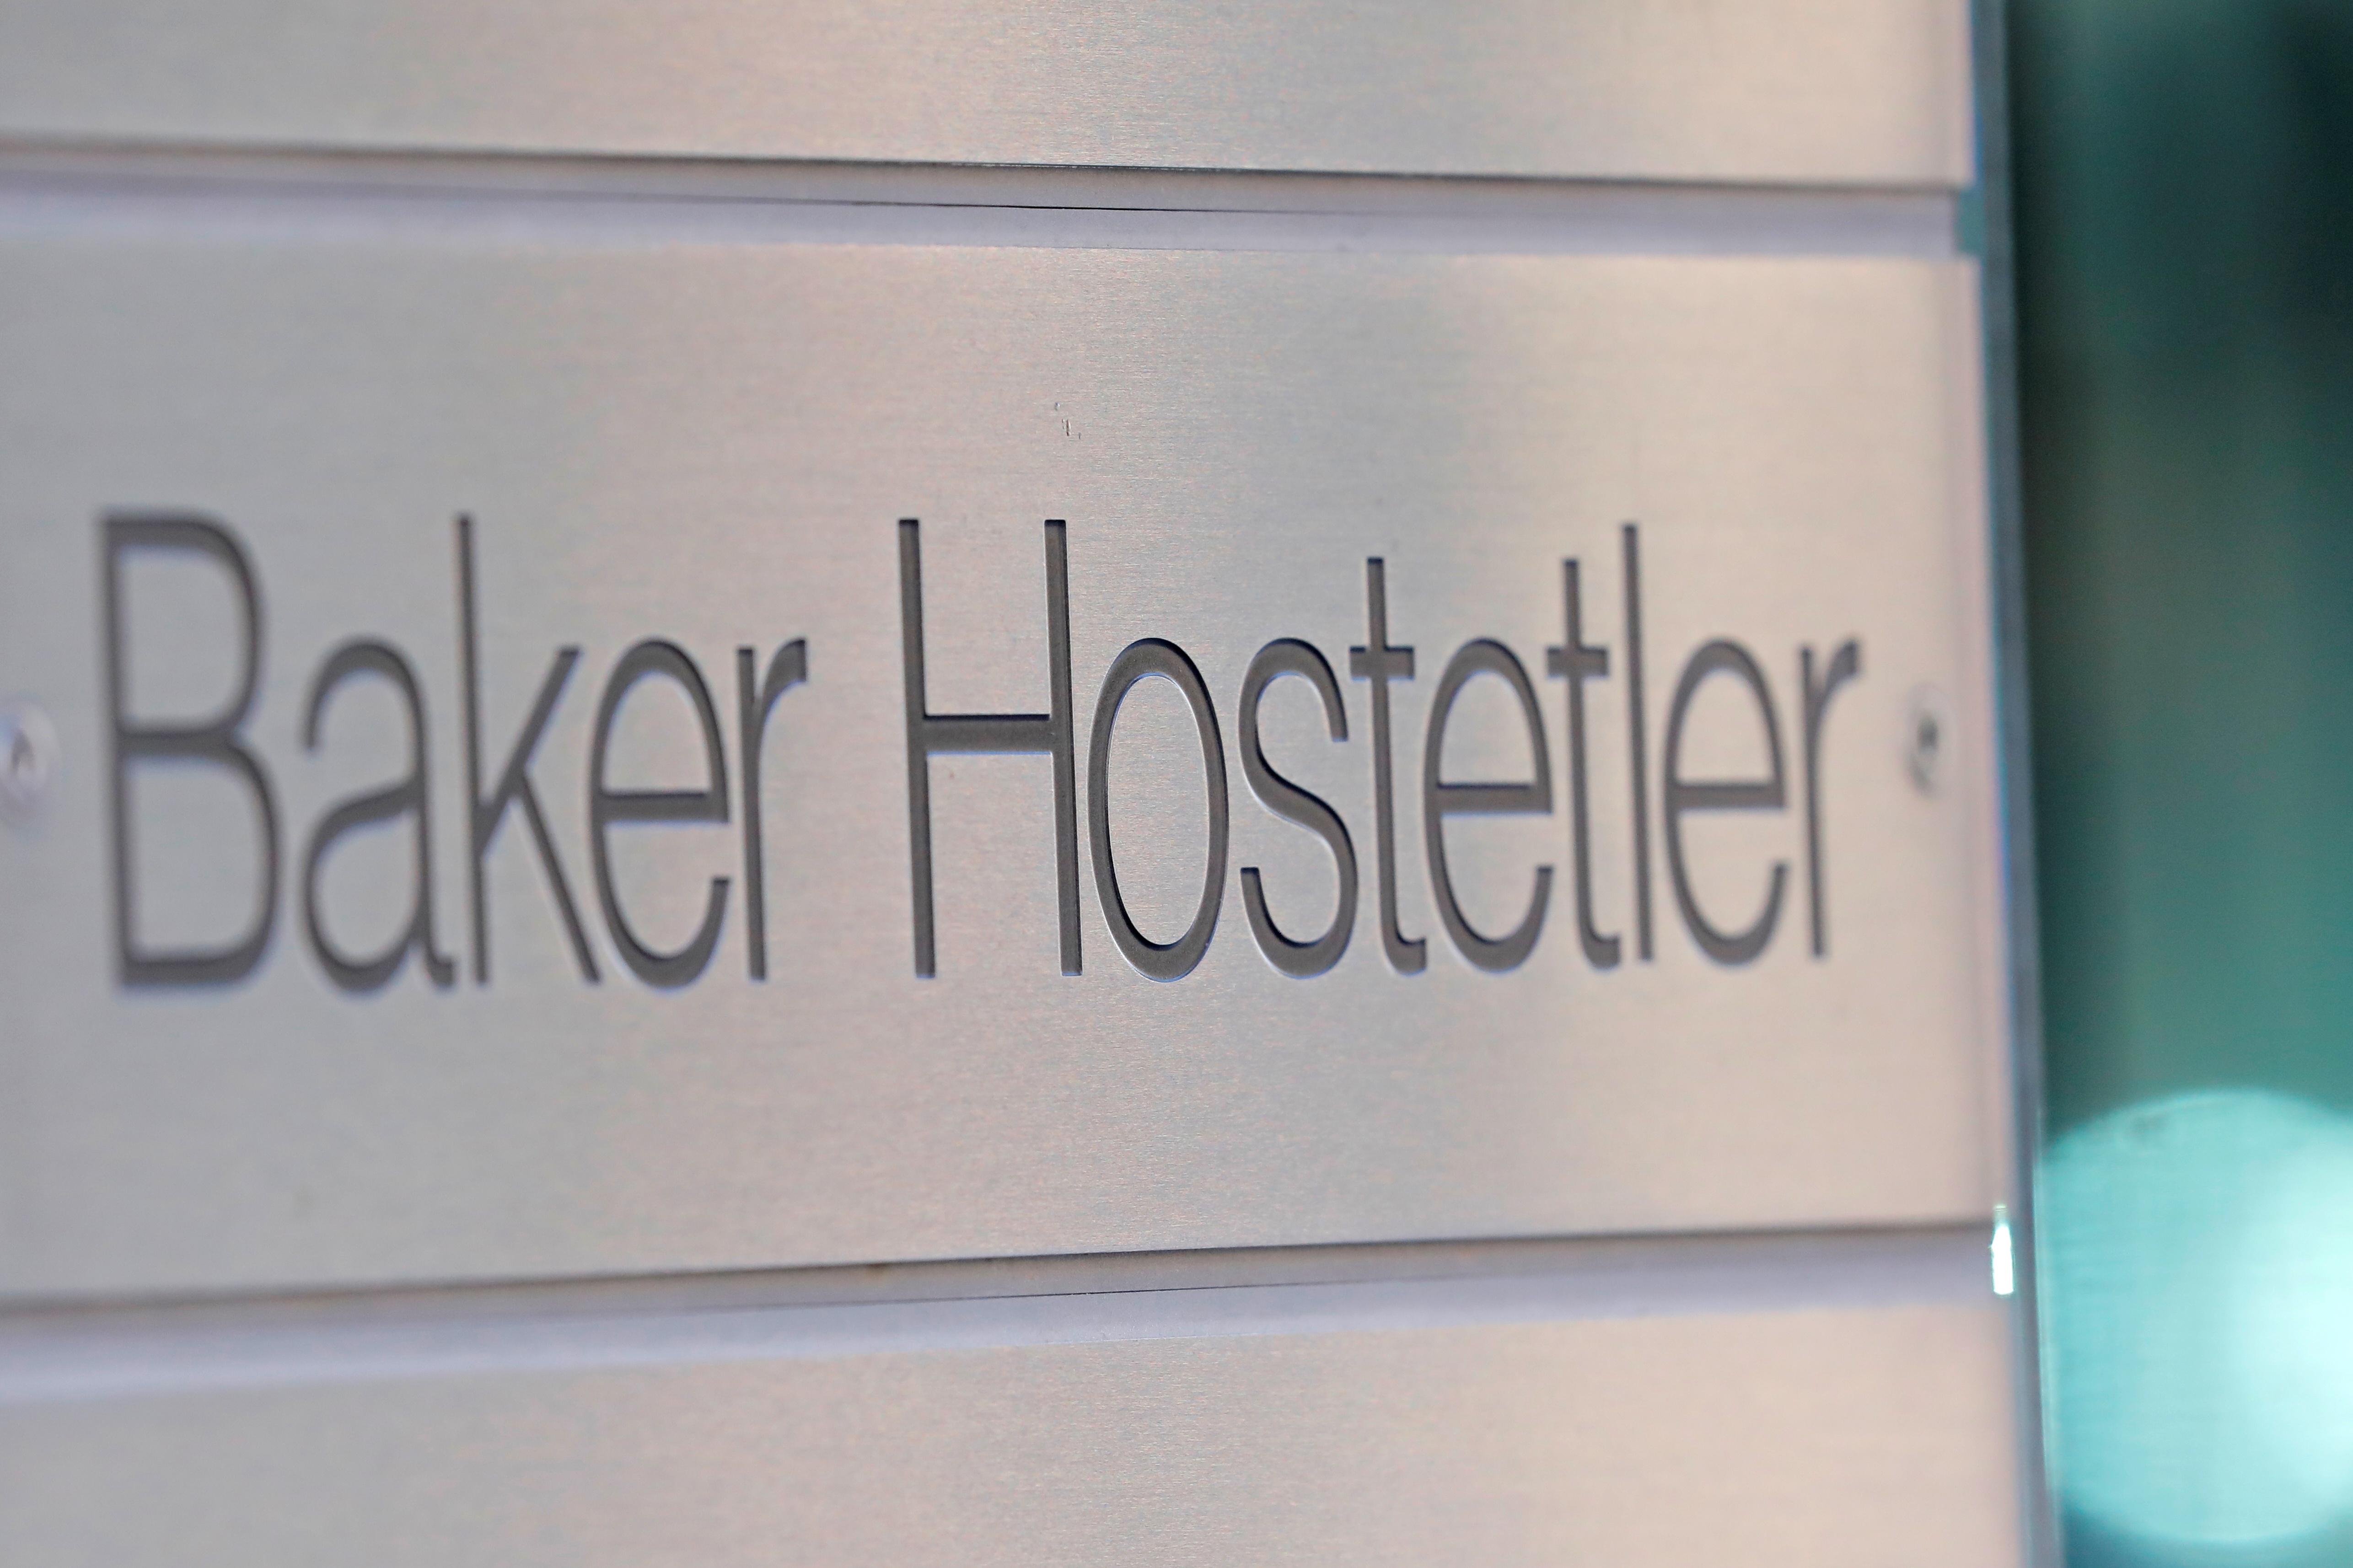 Signage is seen outside of the legal offices of the BakerHostetler law firm in Washington, D.C.